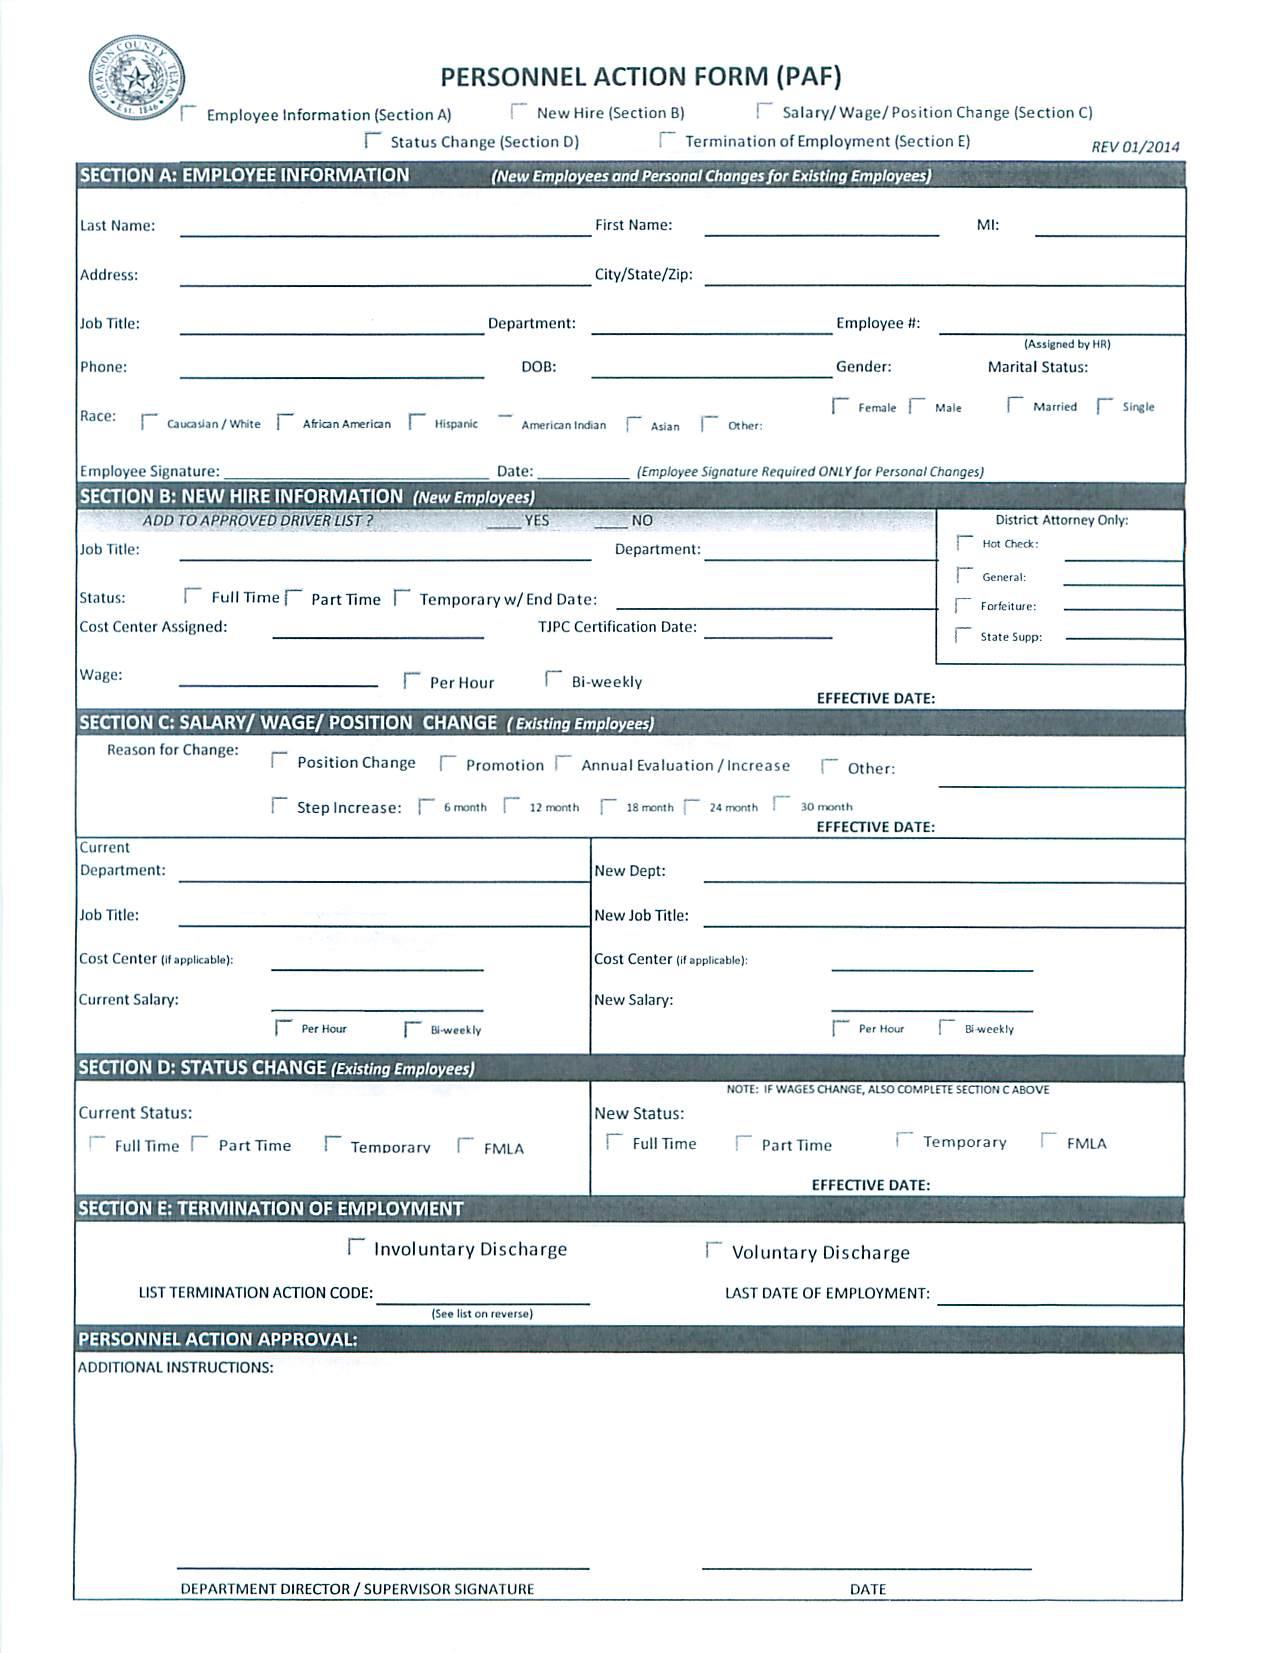 epaf employee personnel action form1